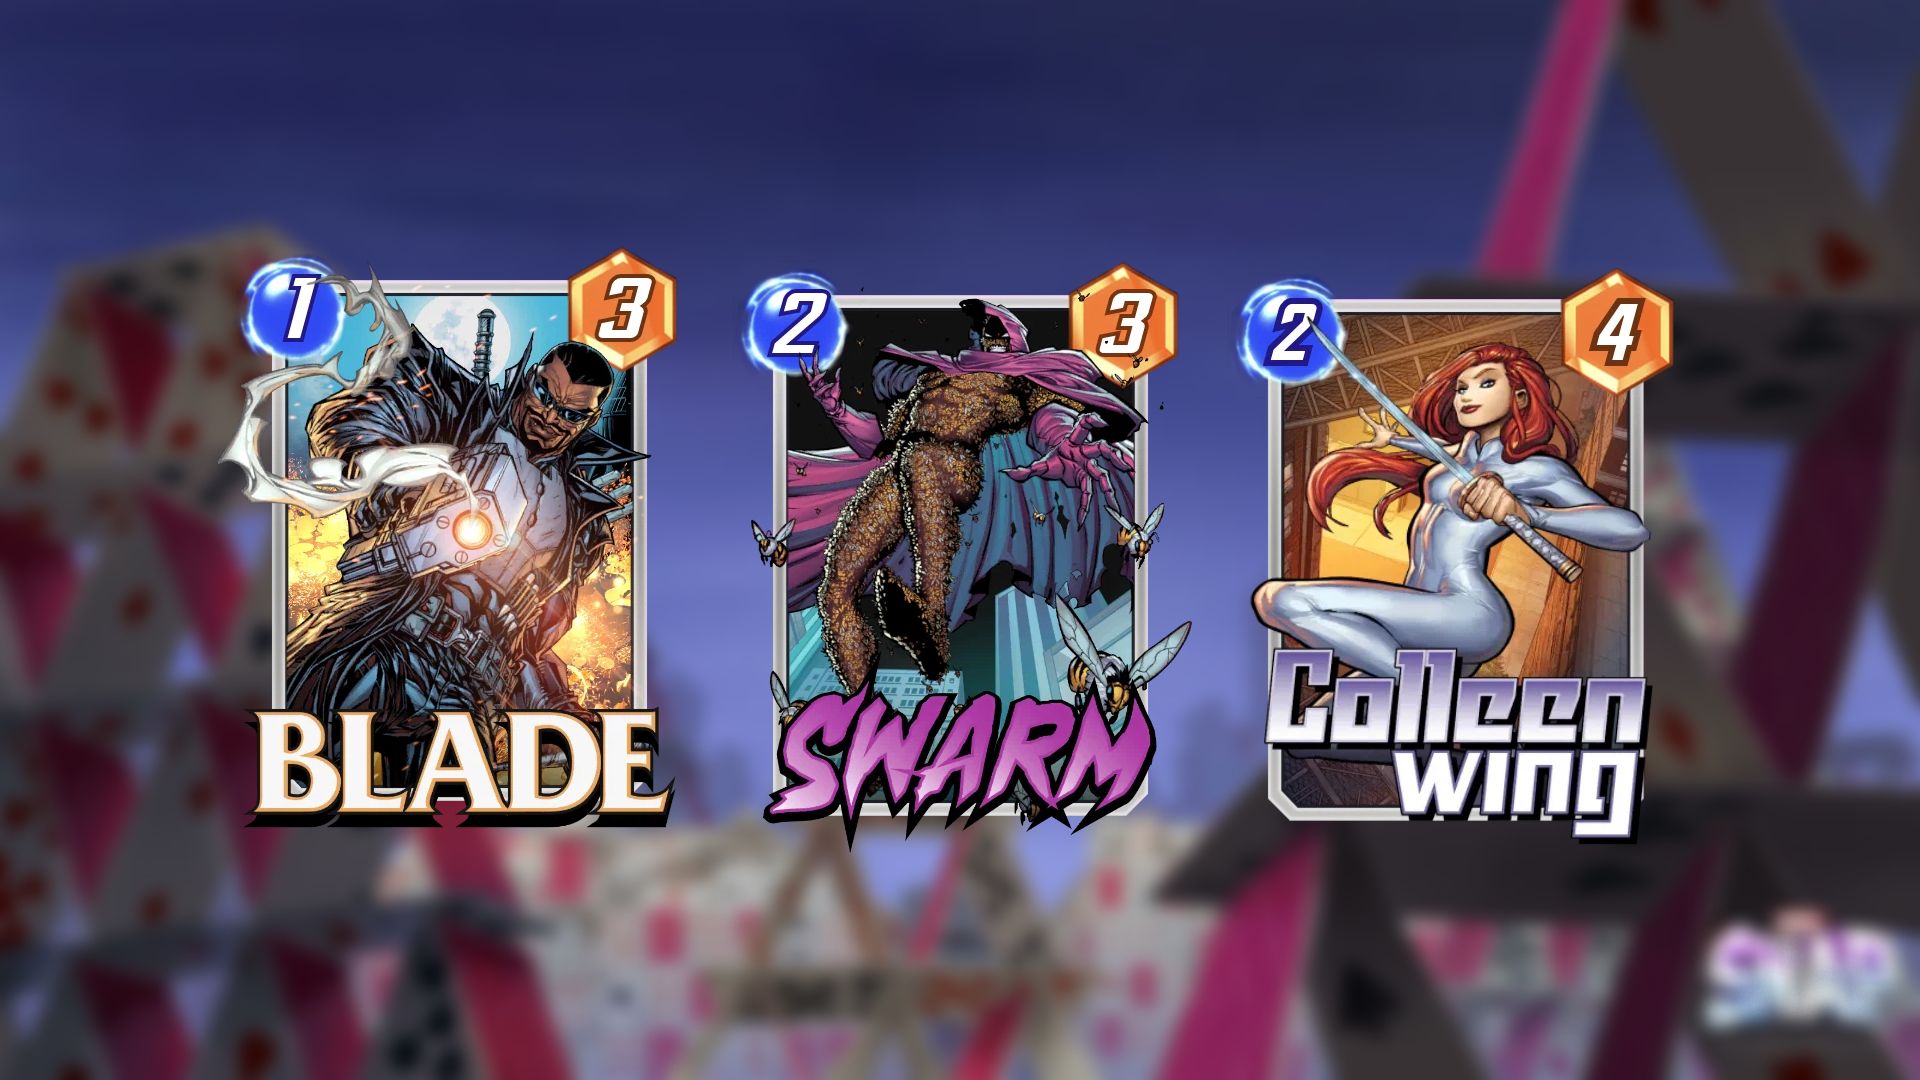 Marvel SNAP Gambit Deck Blade, Swarm And Colleen Wing